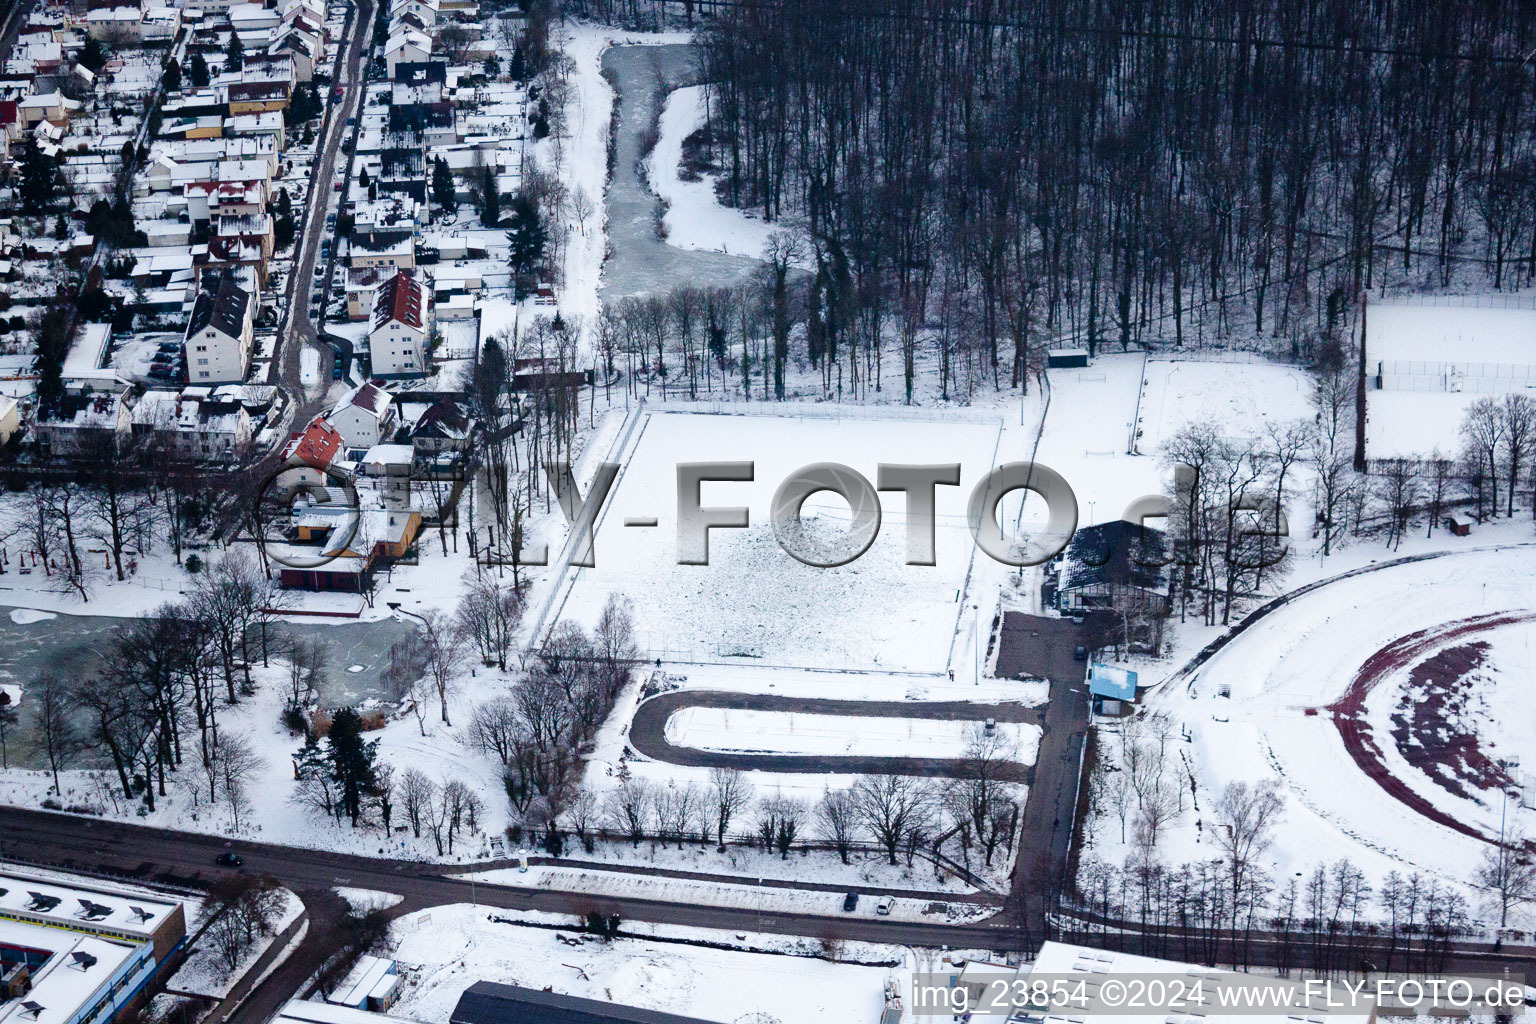 Bienwaldstadion: the new artificial turf pitch, covered in snow in Kandel in the state Rhineland-Palatinate, Germany